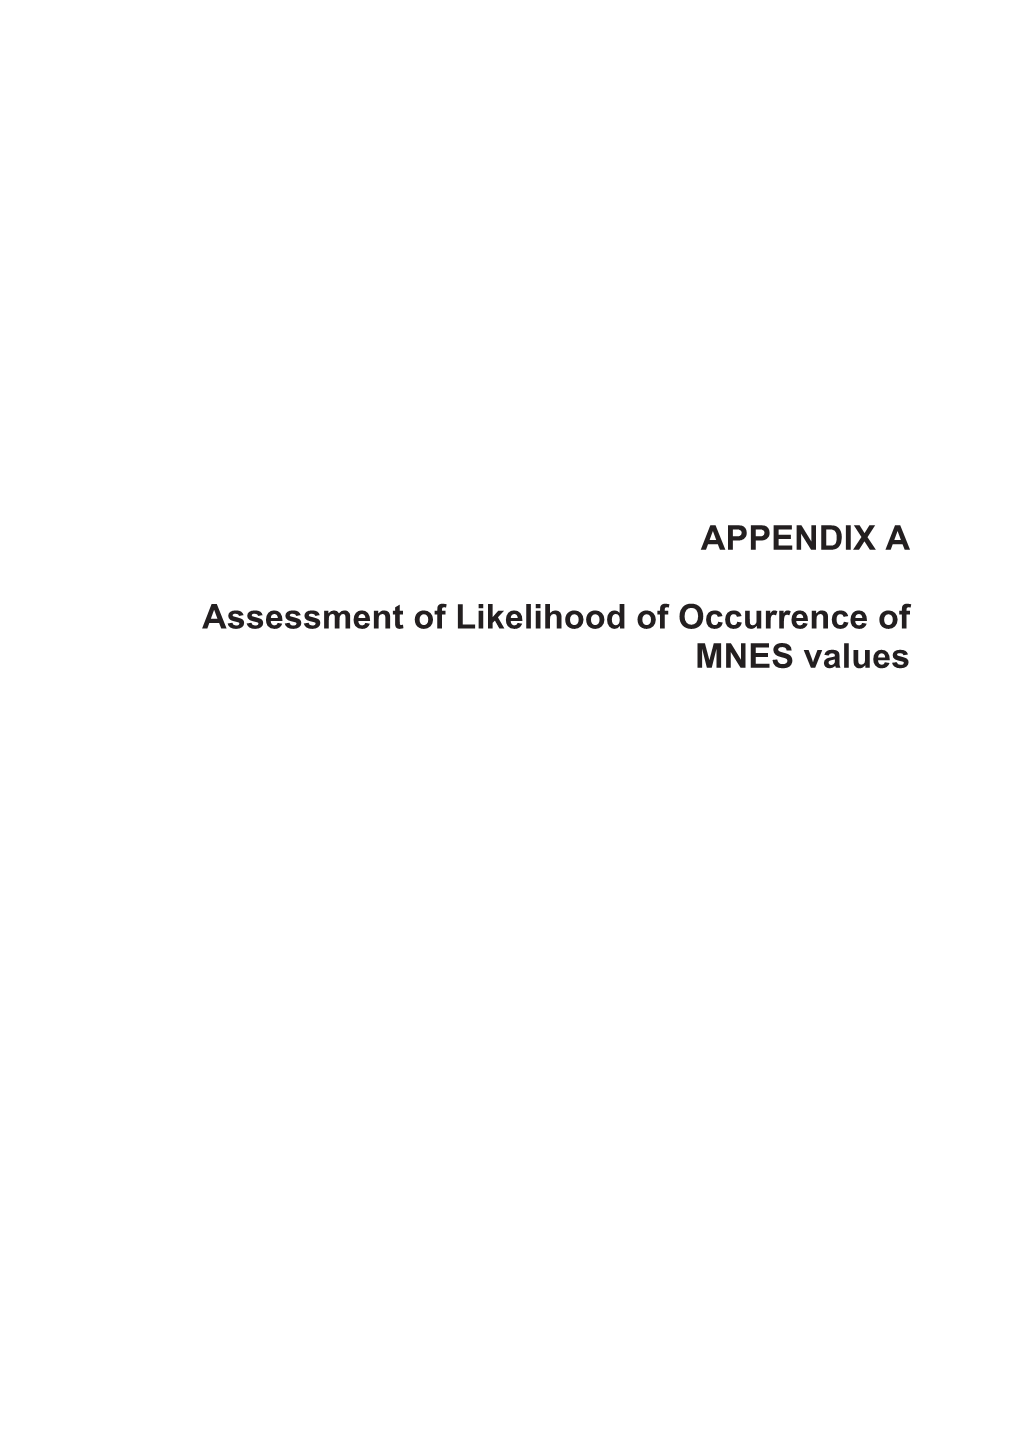 APPENDIX a Assessment of Likelihood of Occurrence of MNES